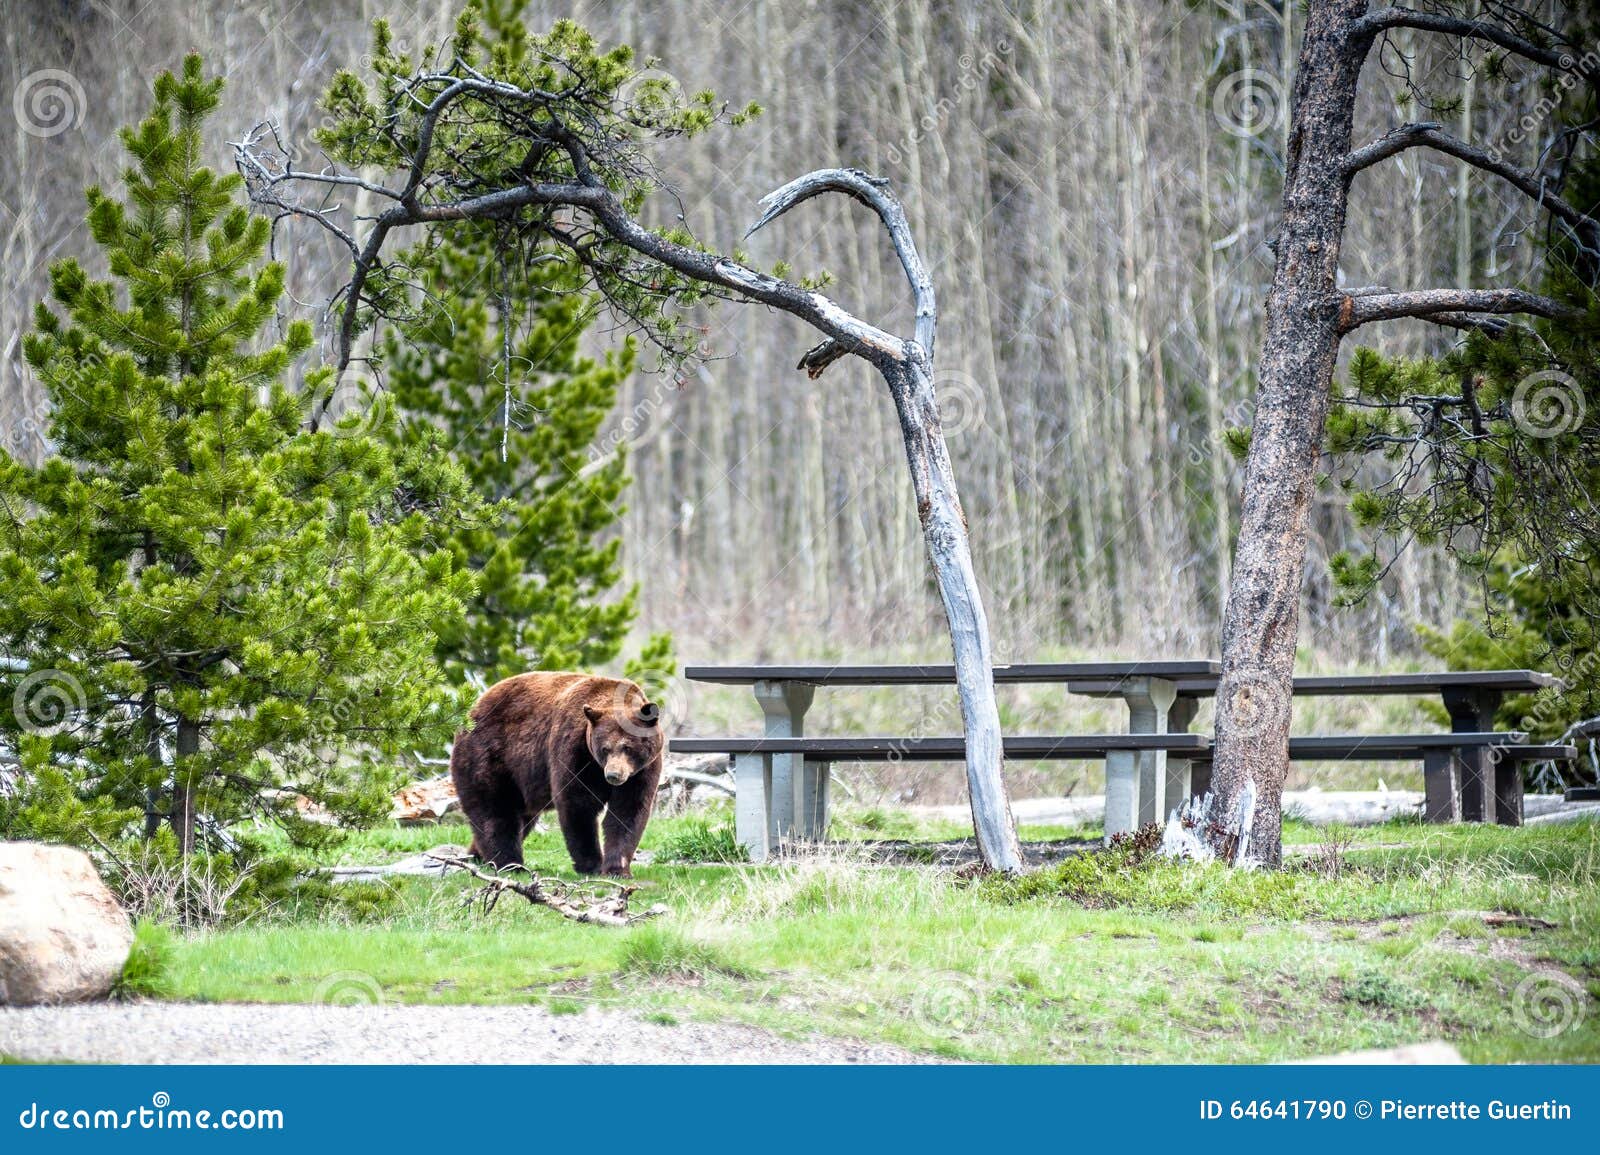 grizzly bear encounter 1